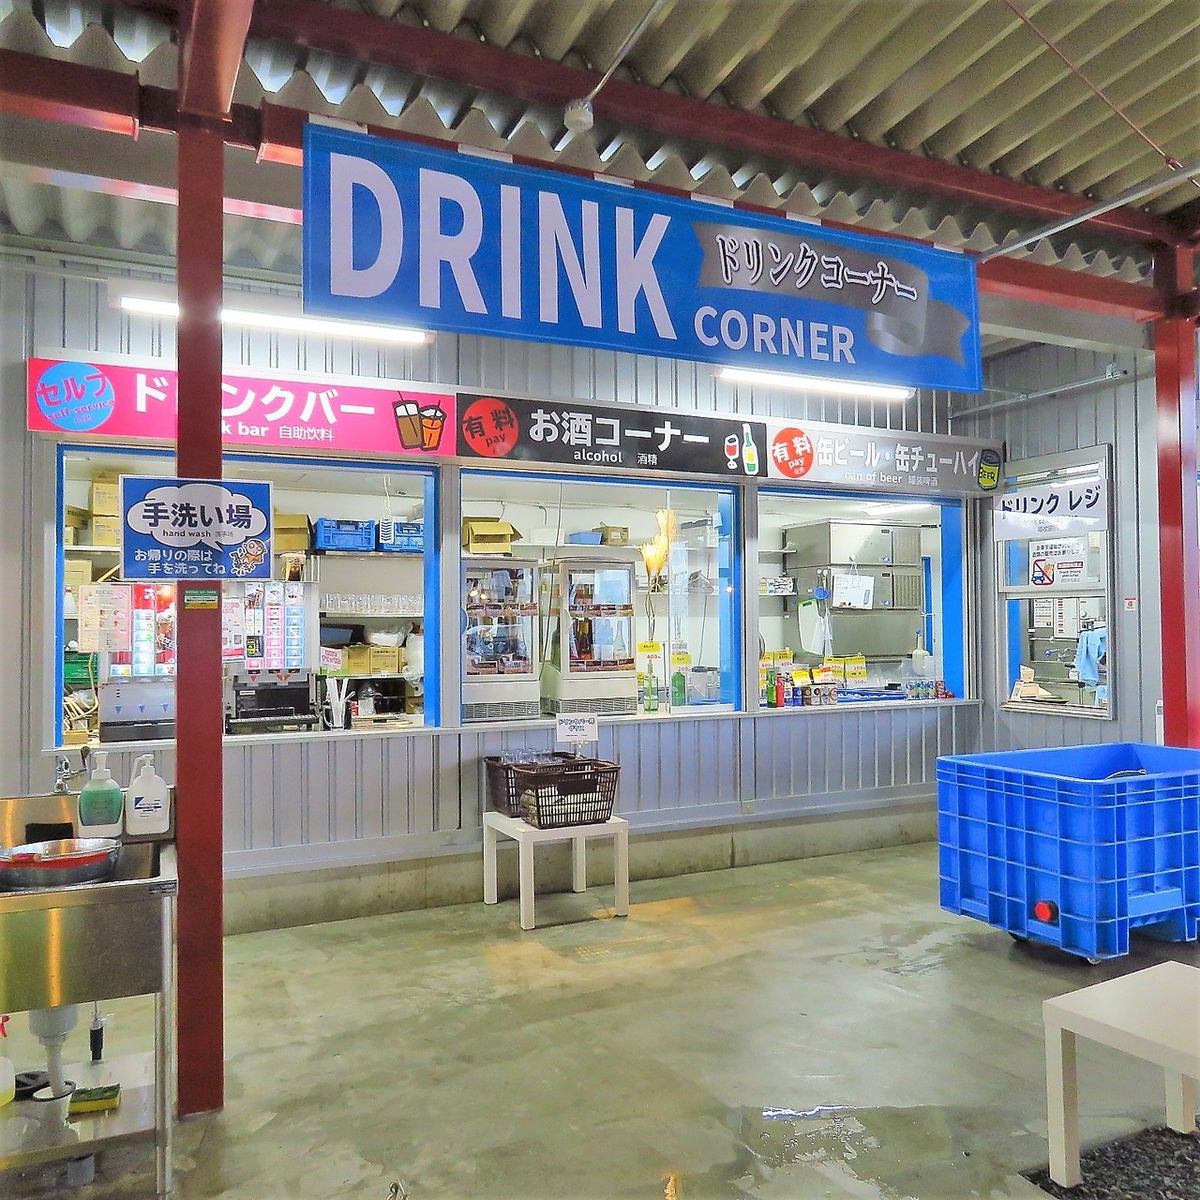 You can enjoy all-you-can-drink for +2200 (tax included)♪